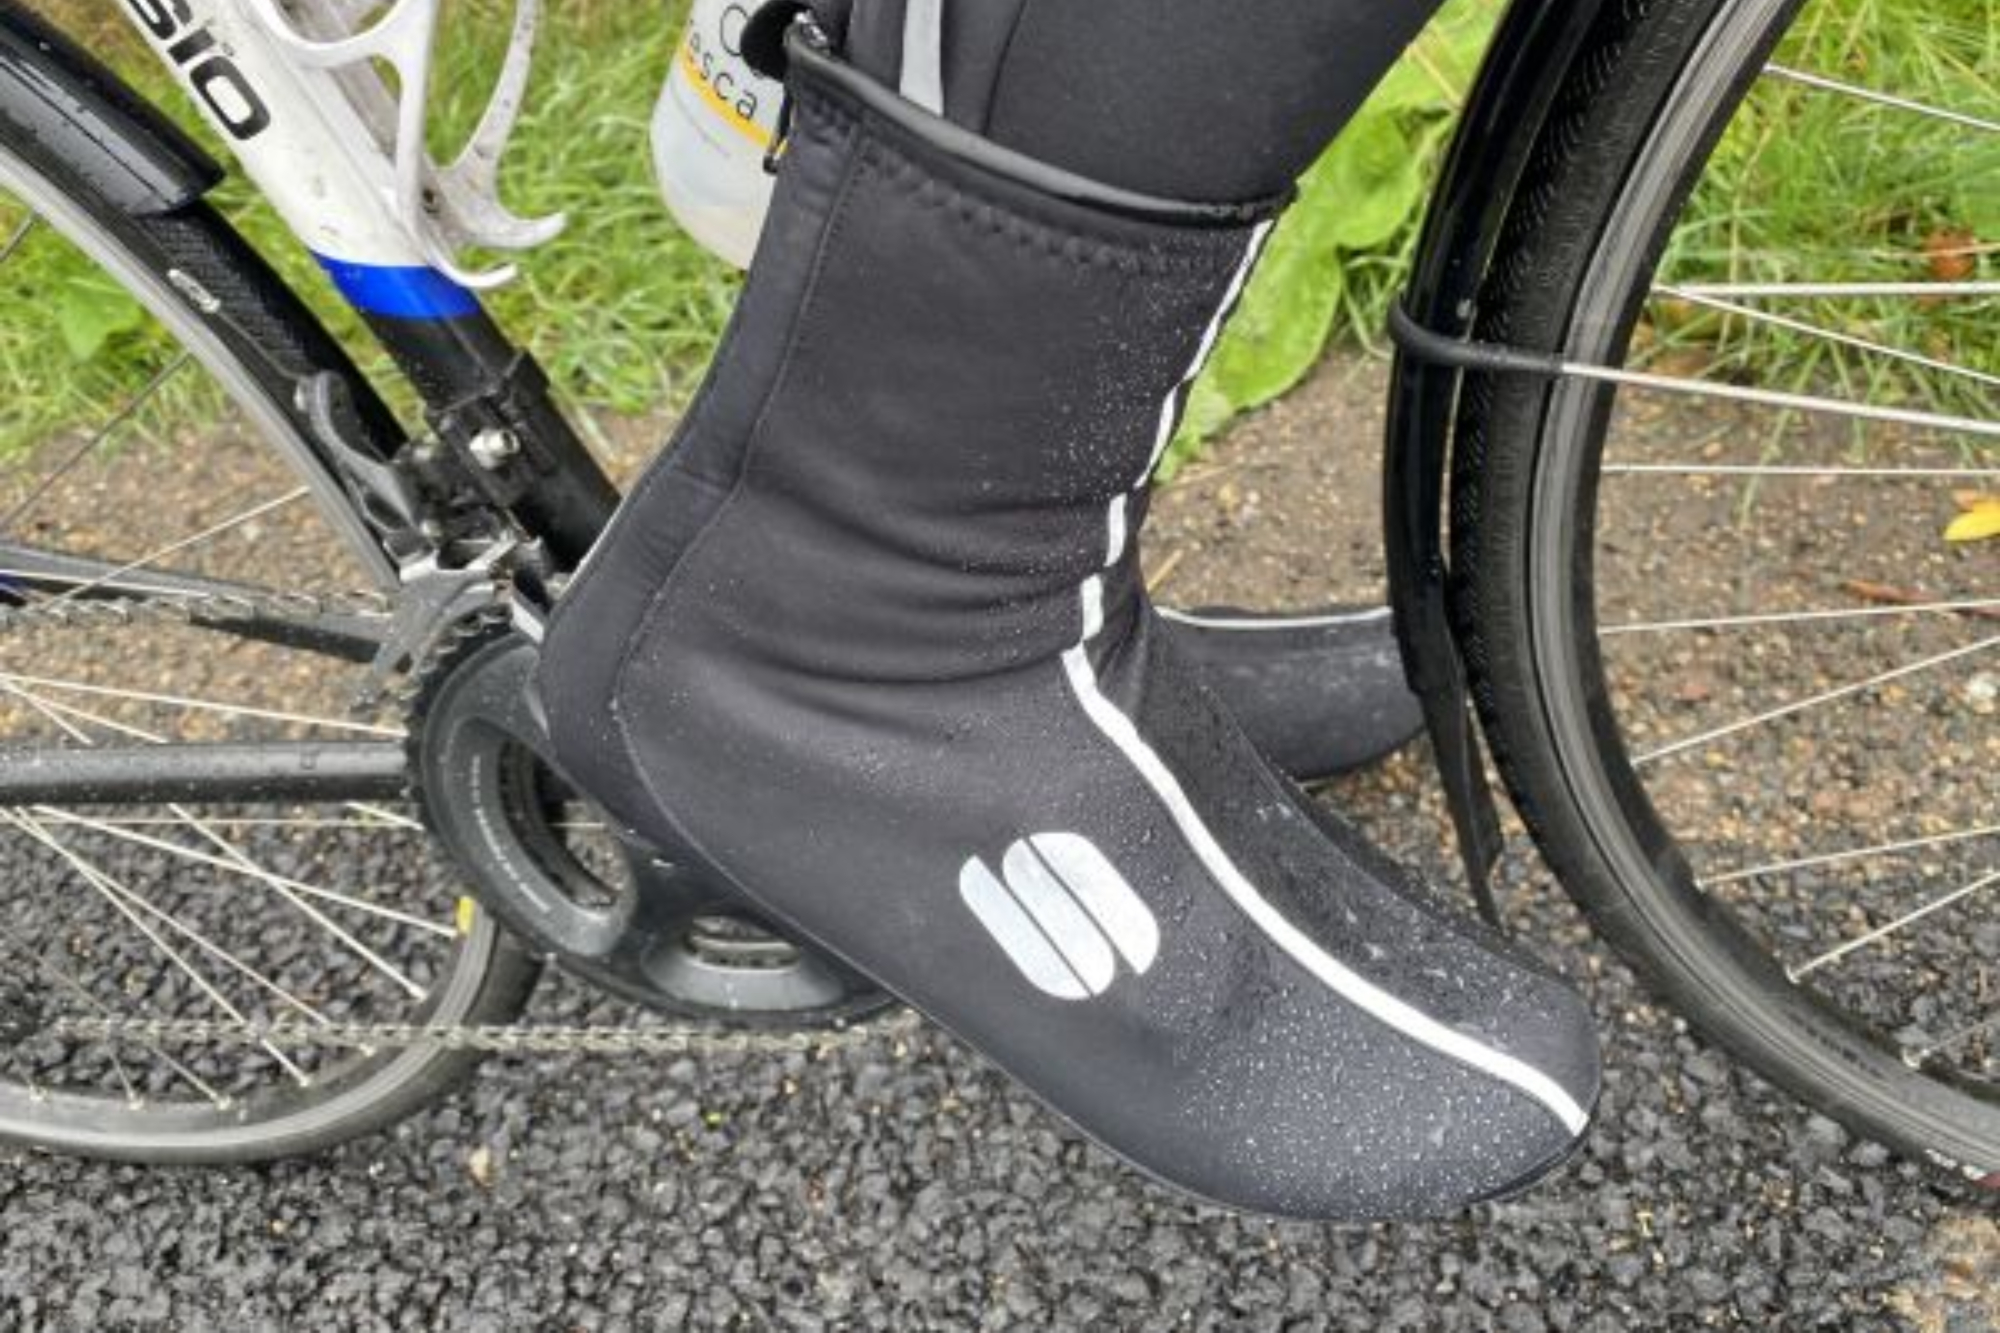 Rider wearing the Sportful WS Reflex 2 Bootie cycling overshoes.